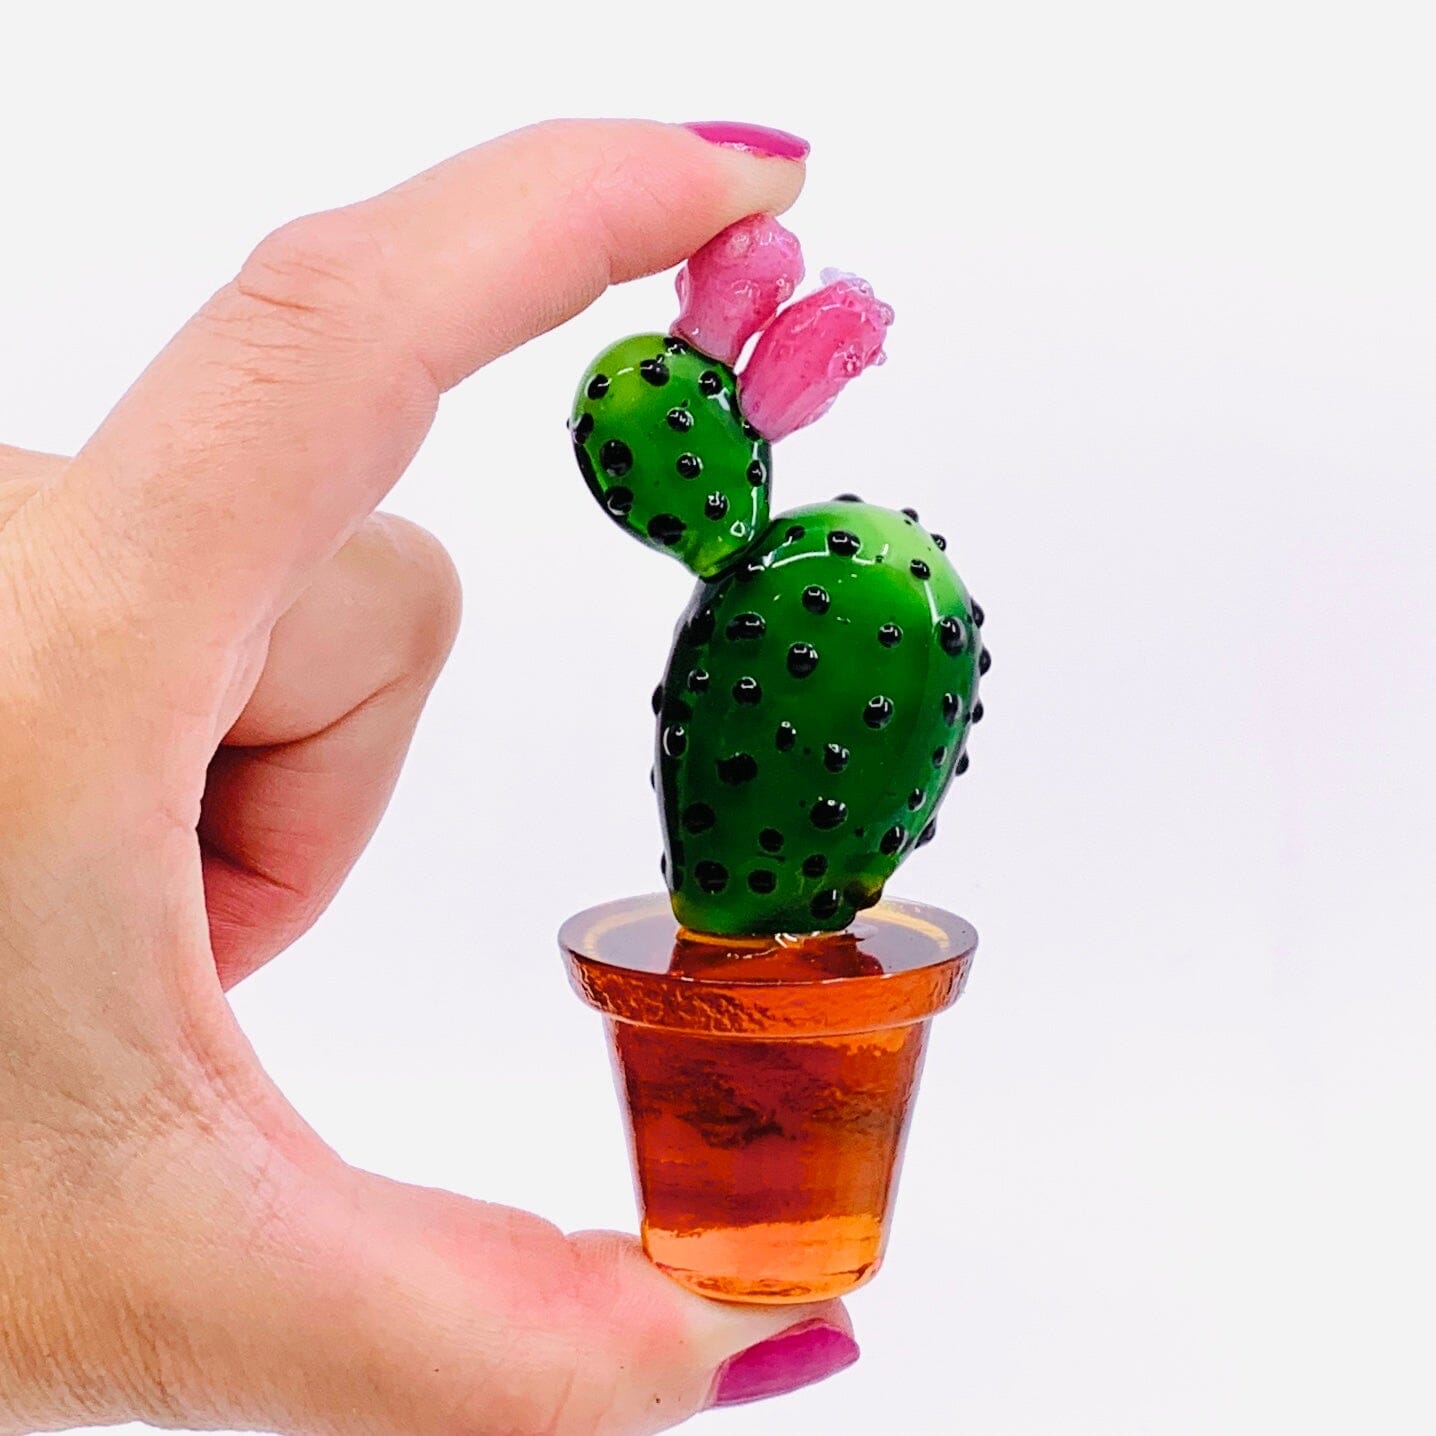 Emotional Support Pocket Cactus, 2 Miniature Dynasty 